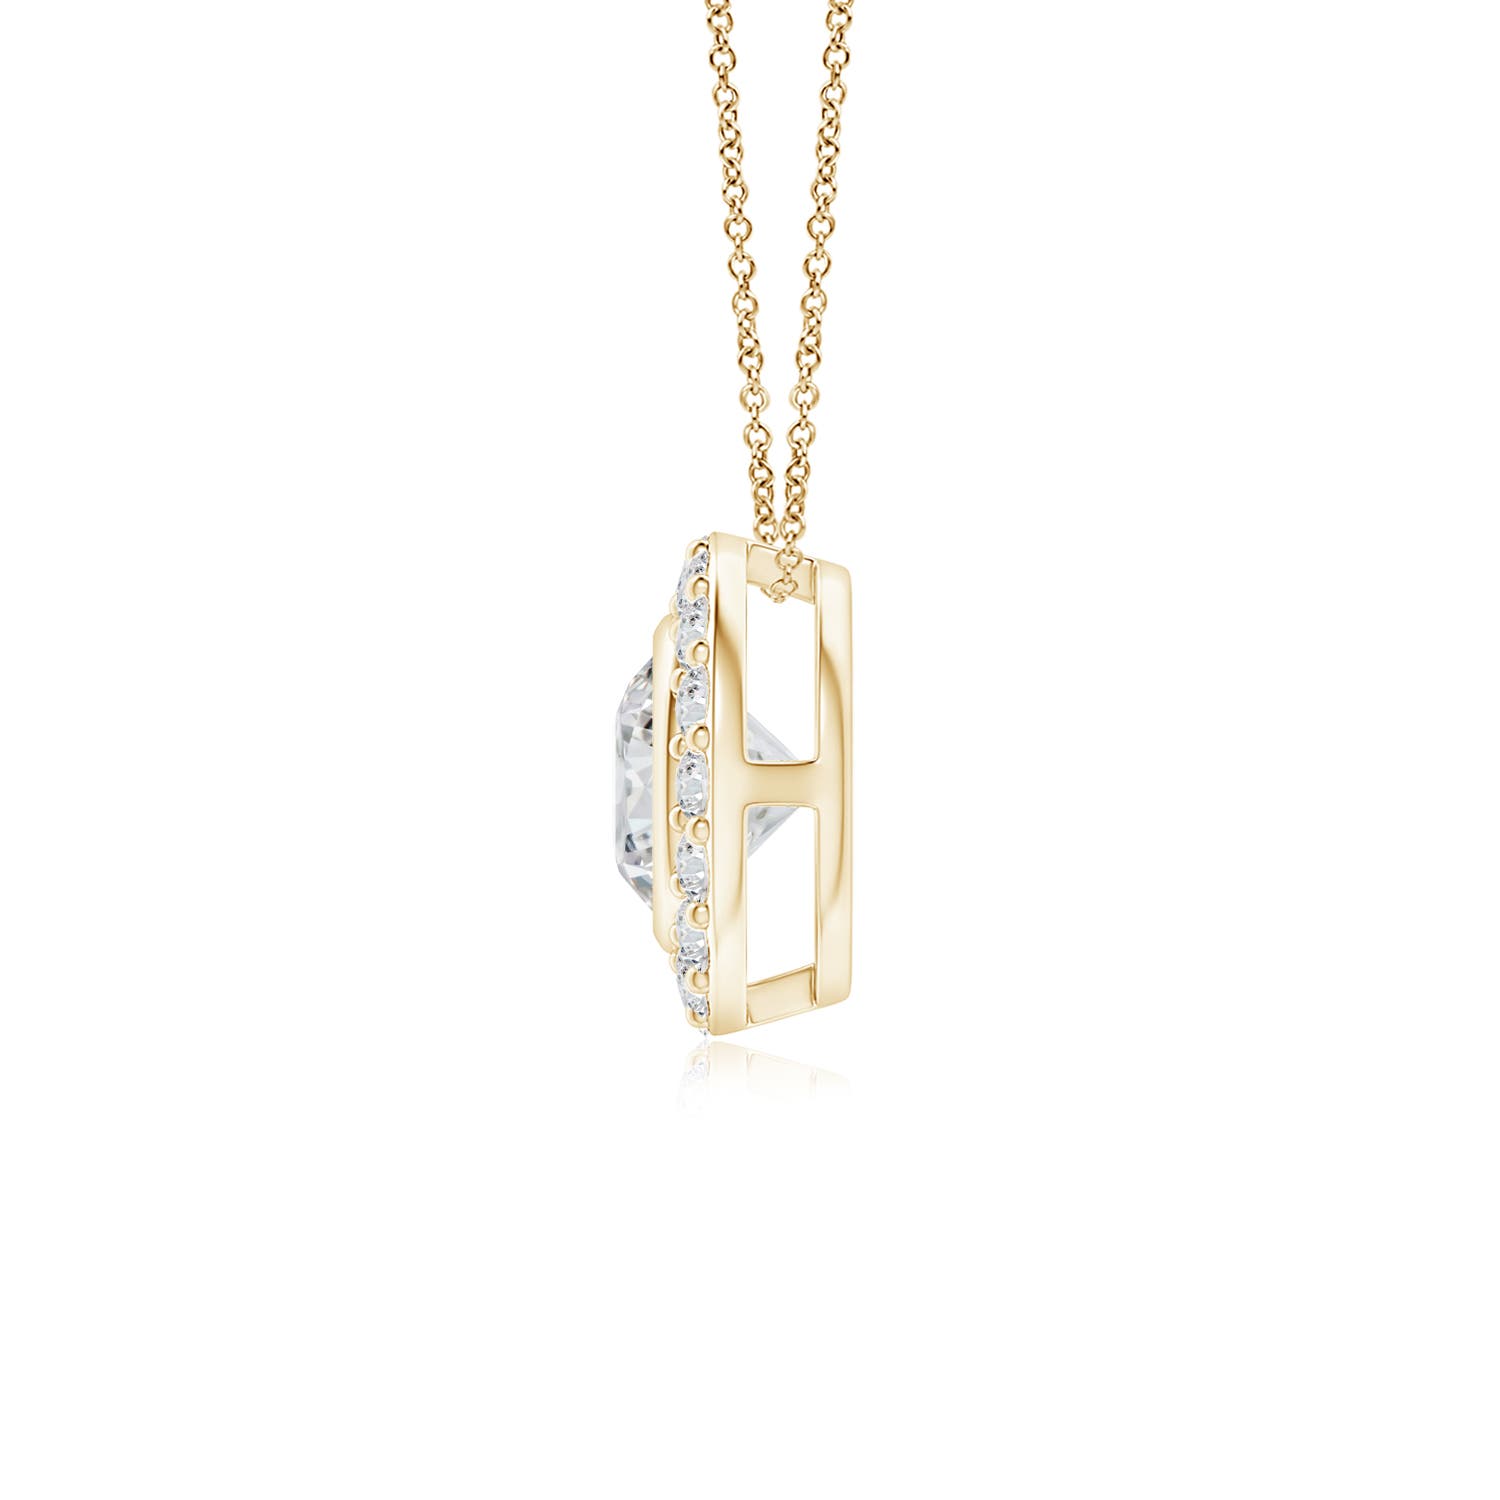 H, SI2 / 0.51 CT / 14 KT Yellow Gold